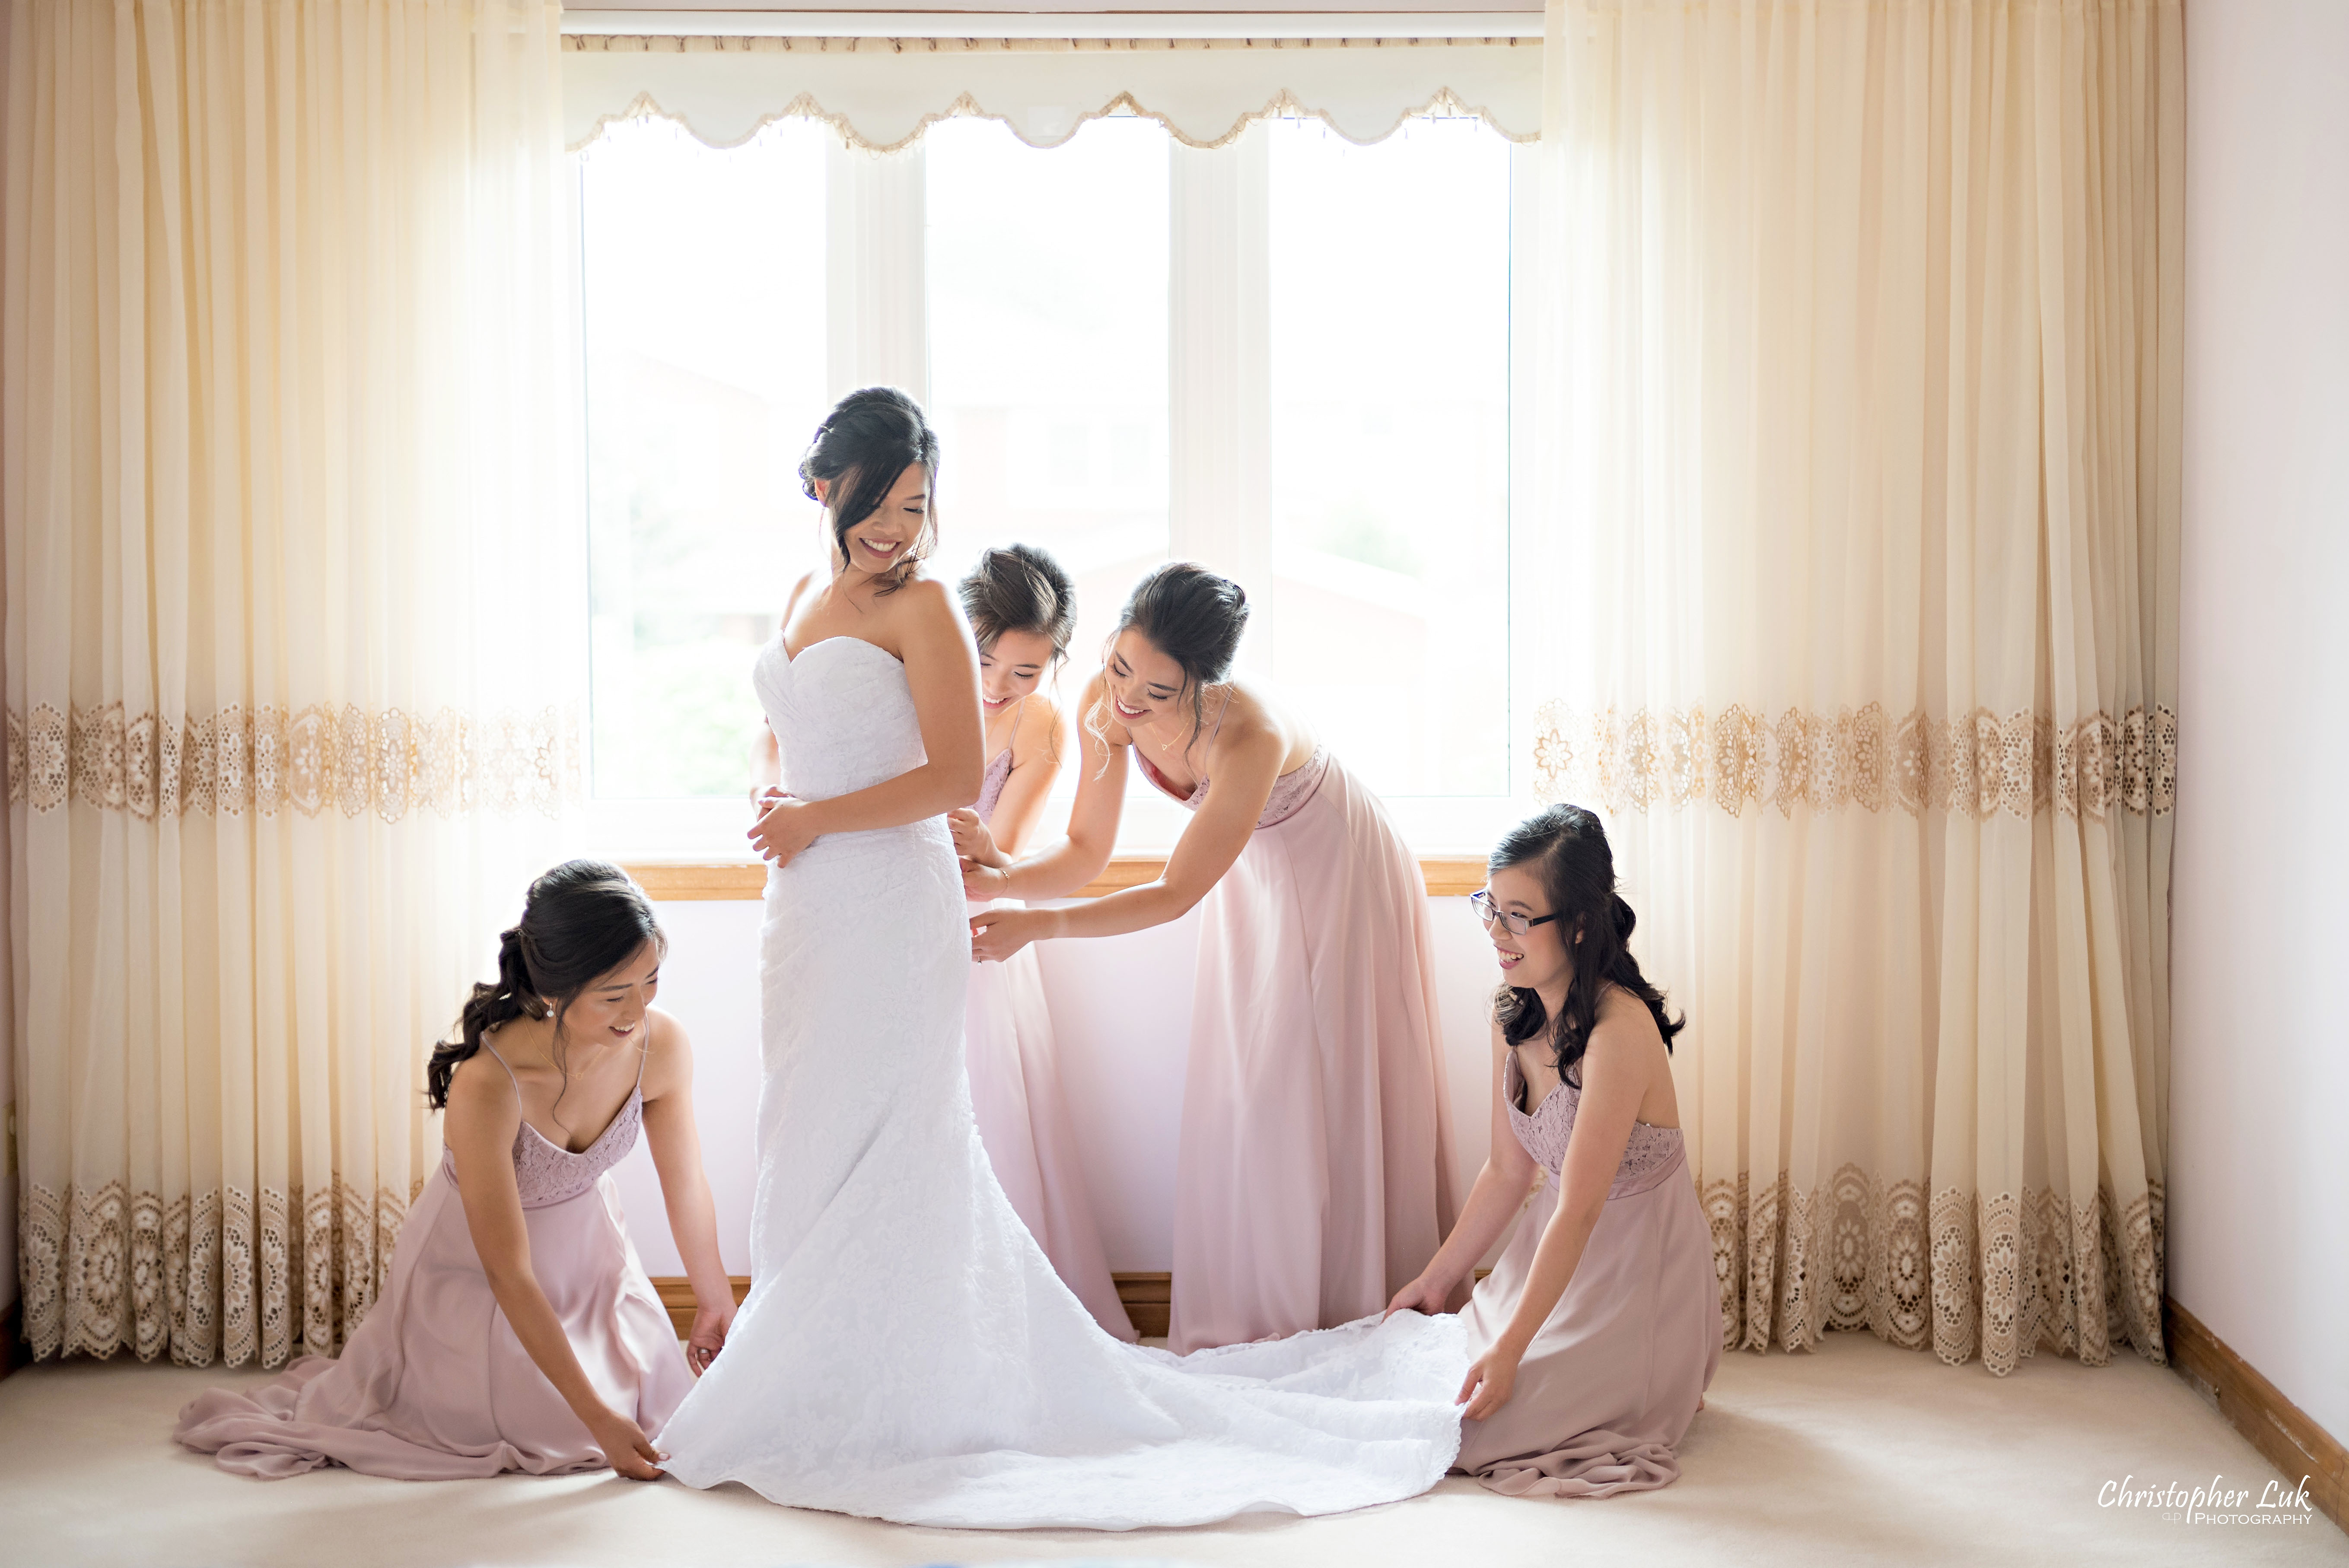 Christopher Luk - Toronto Wedding Photographer - Markham Home Private Residence Bride Alfred Angelo from Joanna’s Bridal Natural Candid Photojournalistic Creative Curtains Portrait Bridesmaids Getting Ready Wide